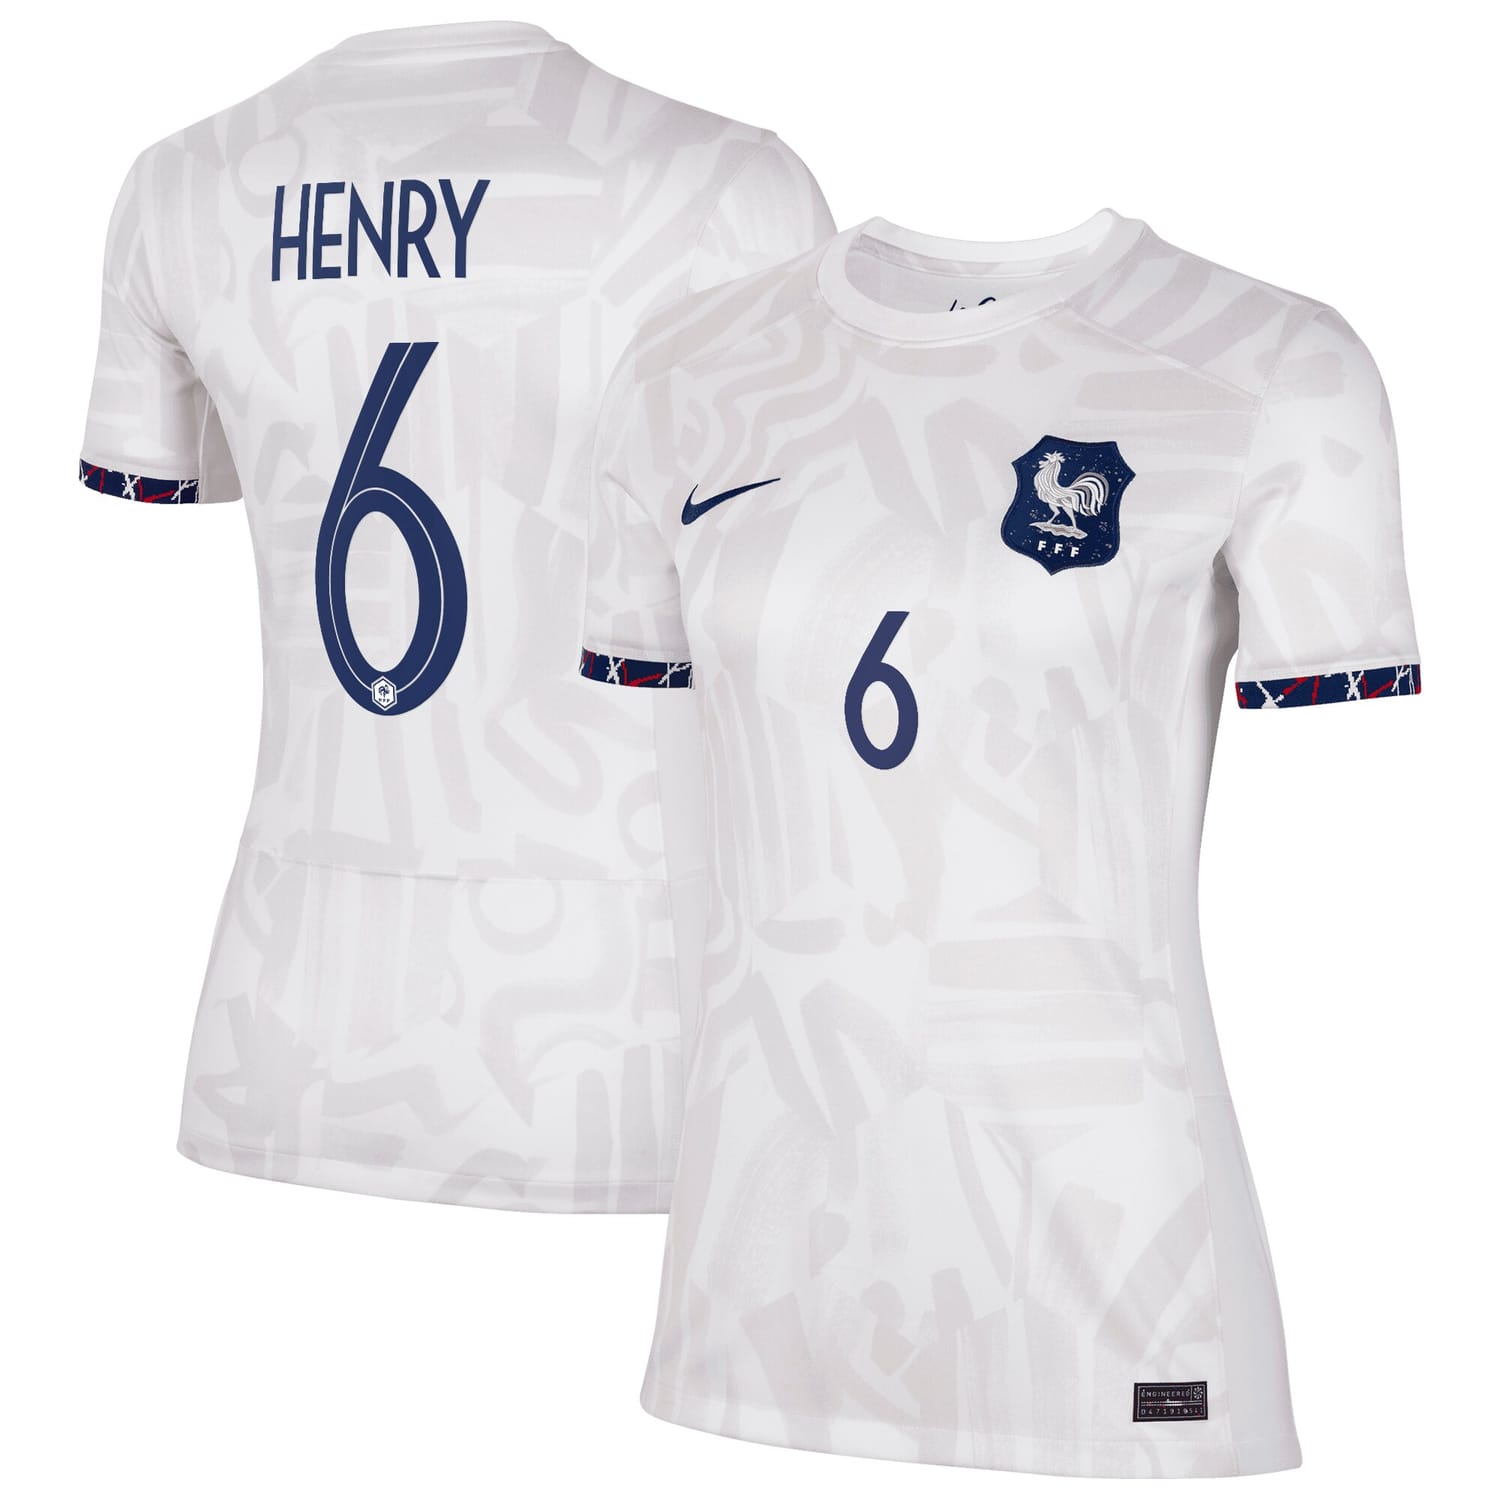 France National Team Away Jersey Shirt 2023-24 player Amandine Henry 6 printing for Women